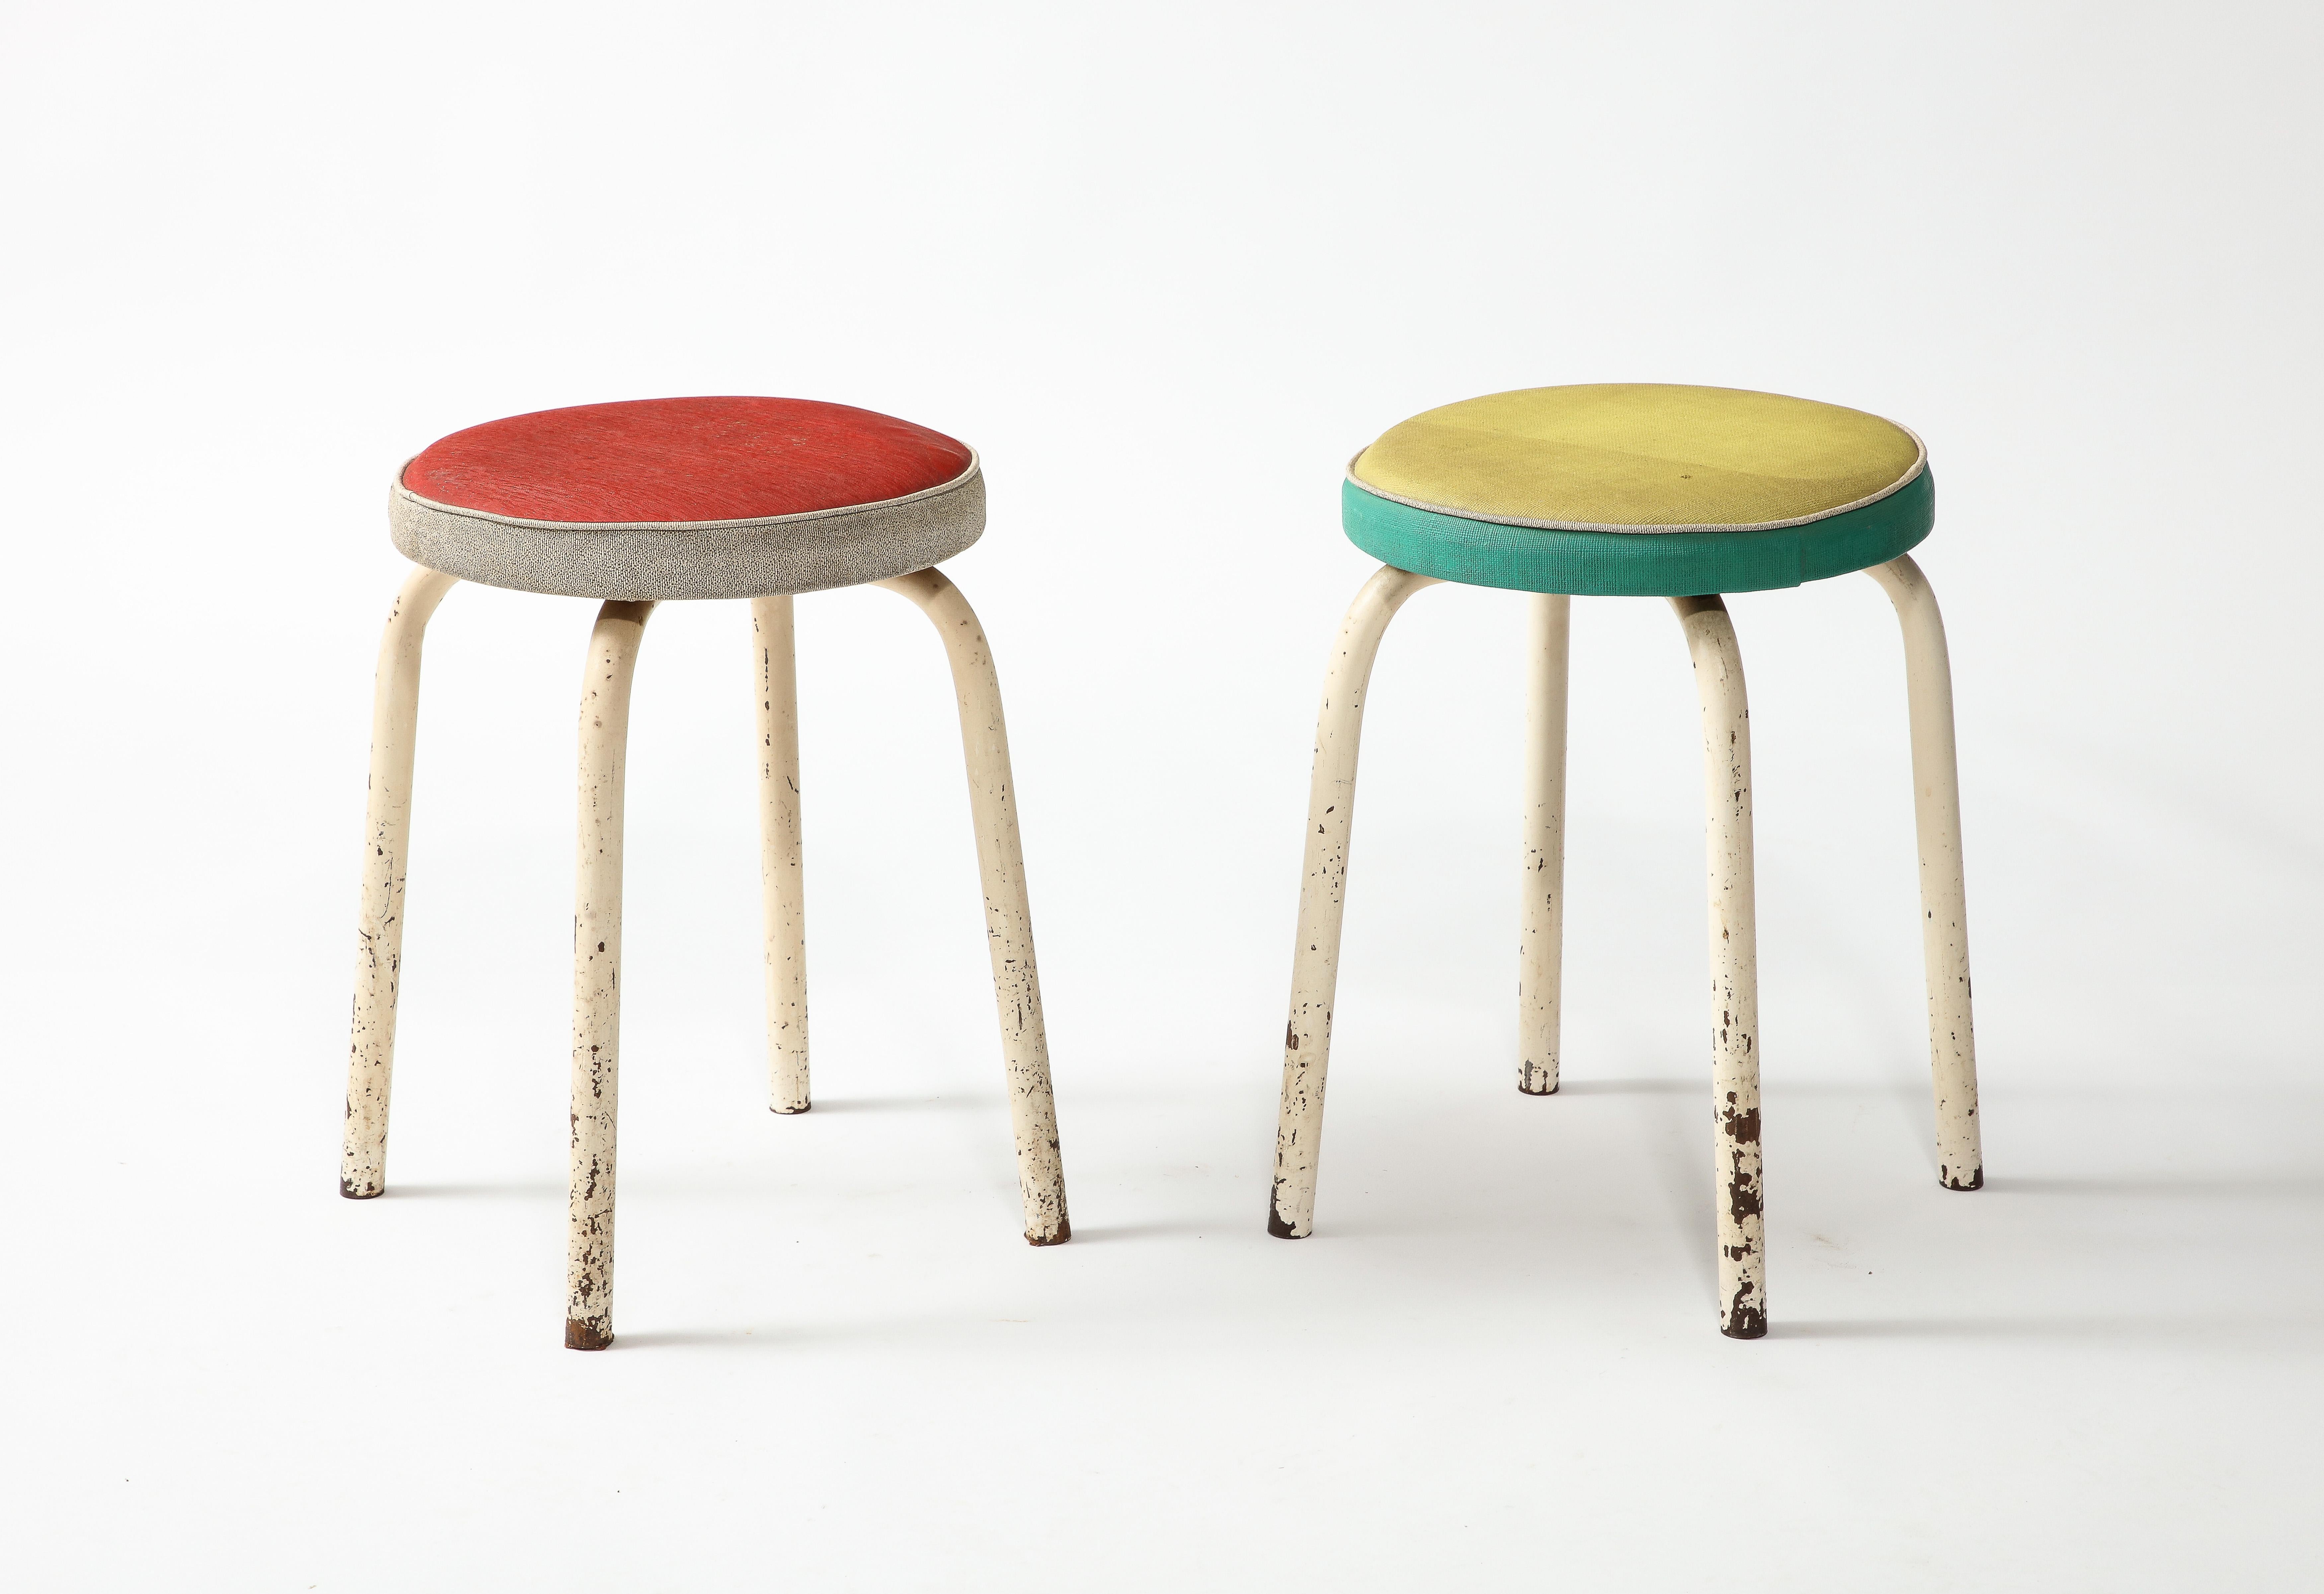 Pair of multicolored stools in original upholstery and patina, reminiscent of the bright colored works of Mategot.